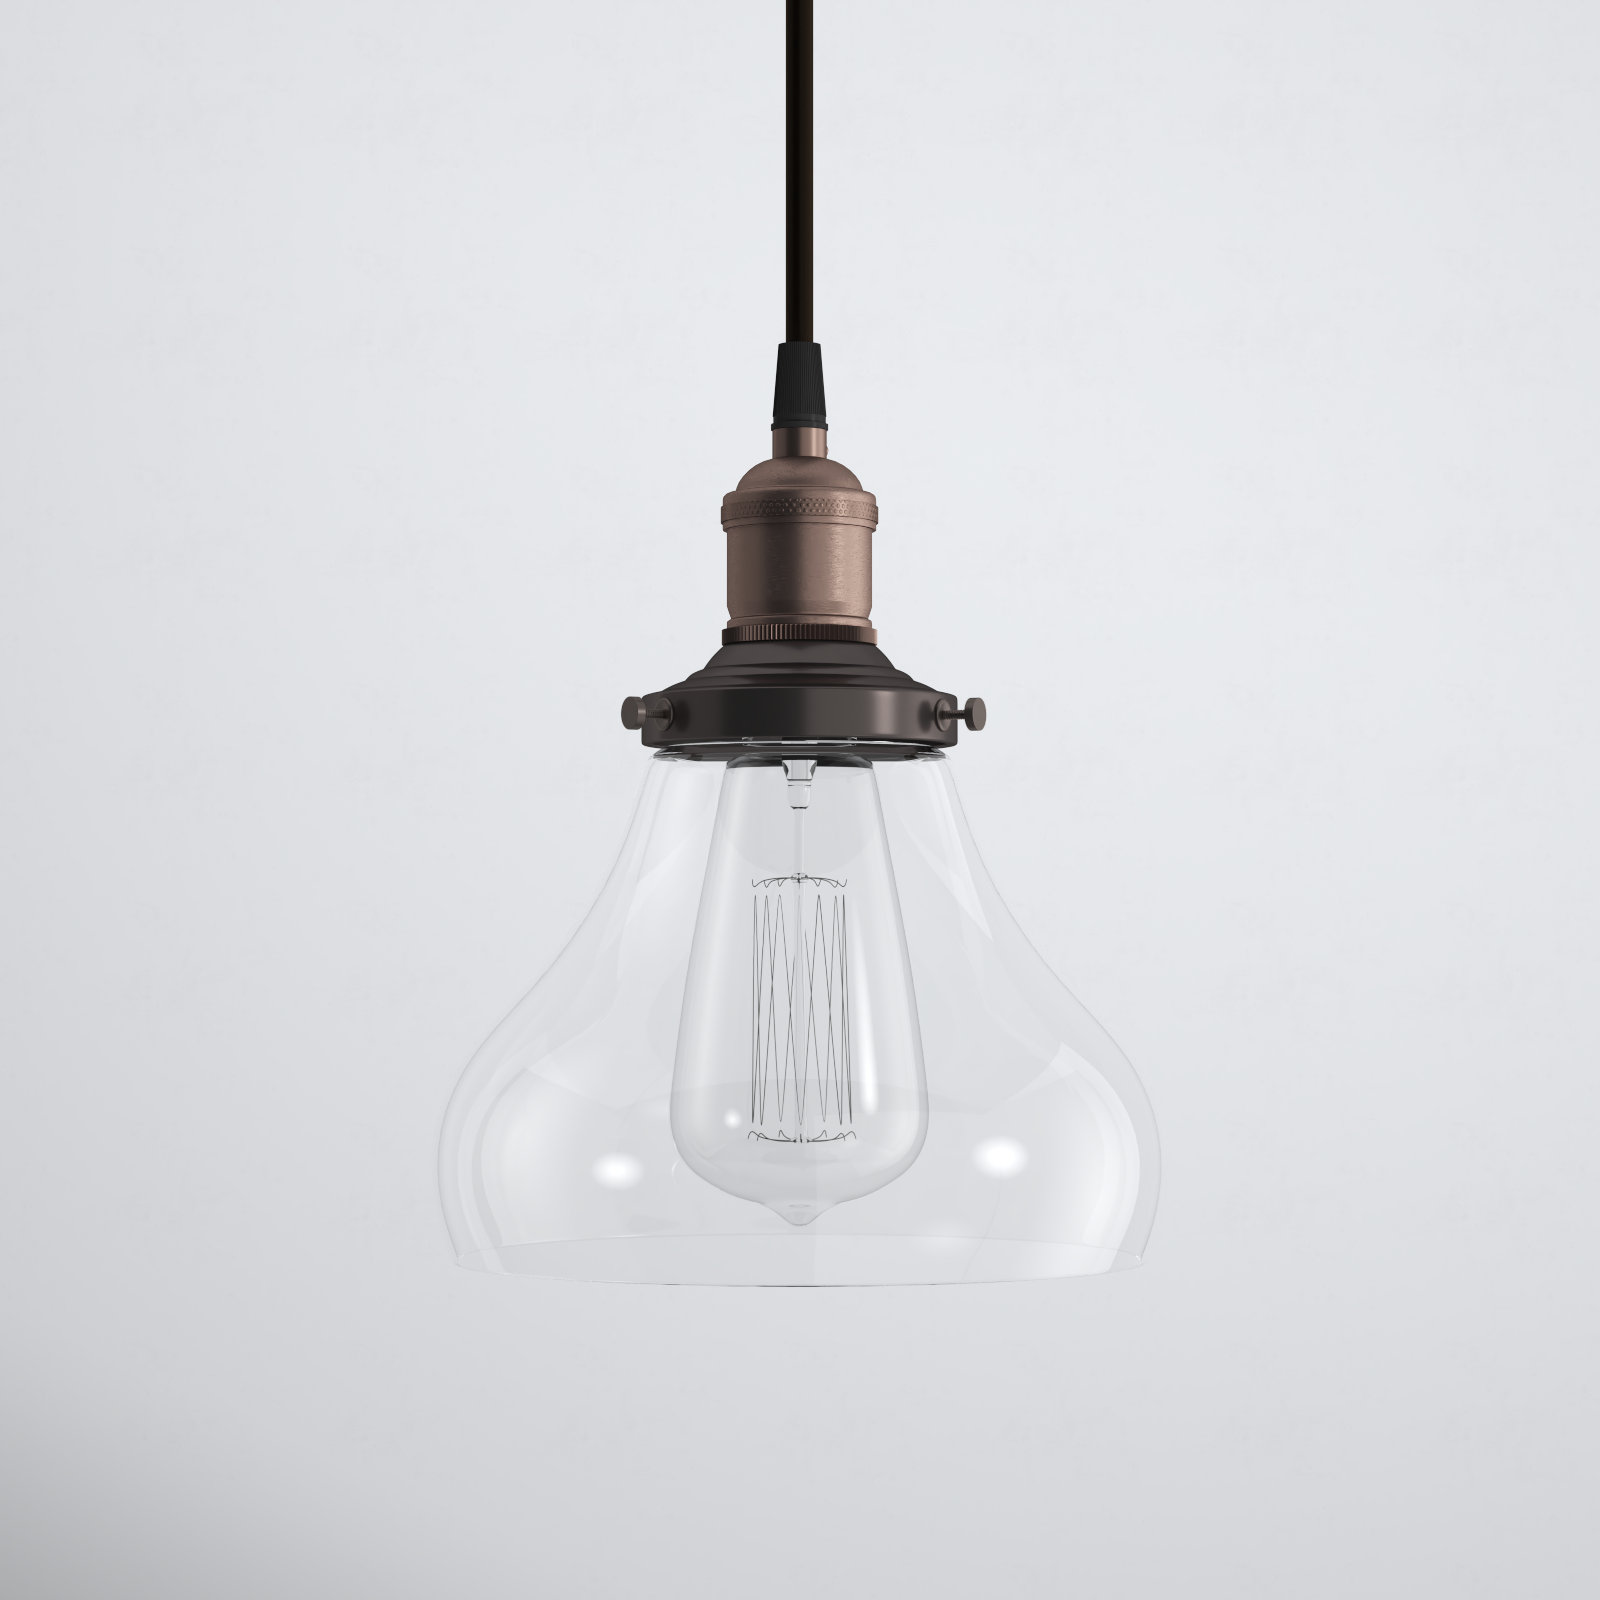 Clear & Glass Shade Pendant Lighting You'll Love